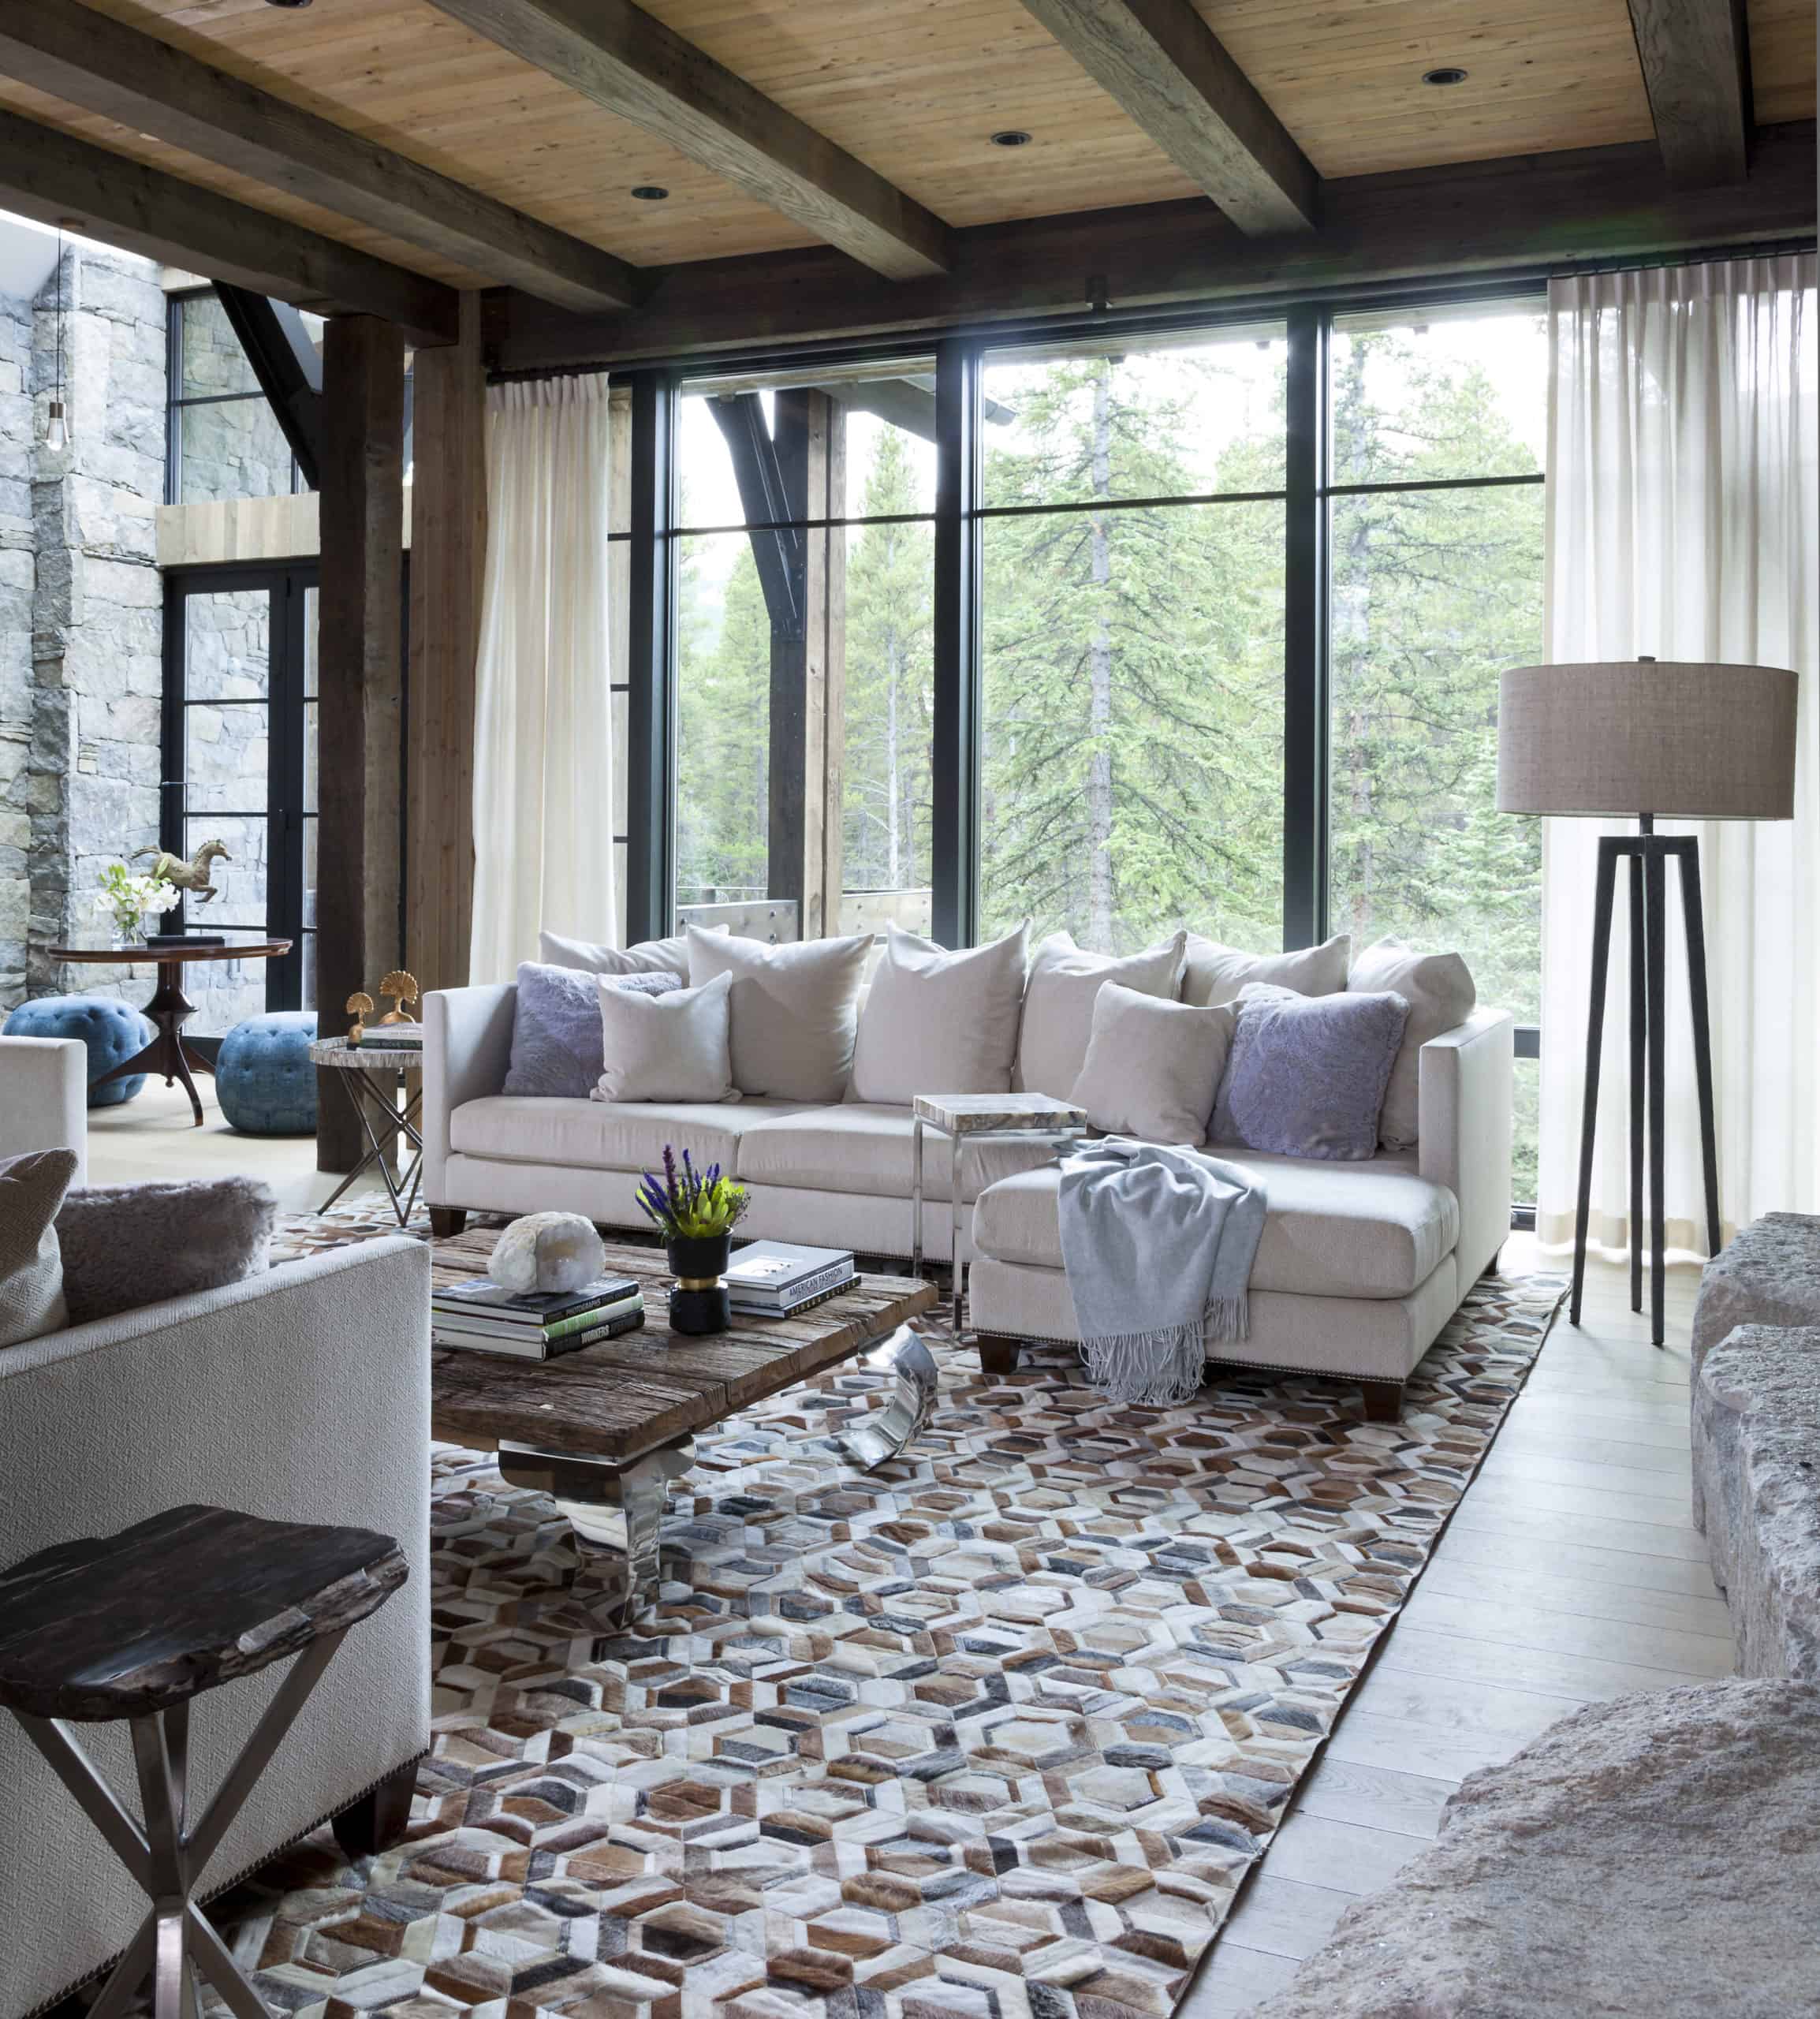 Incorporating nature in home interiors using large windows